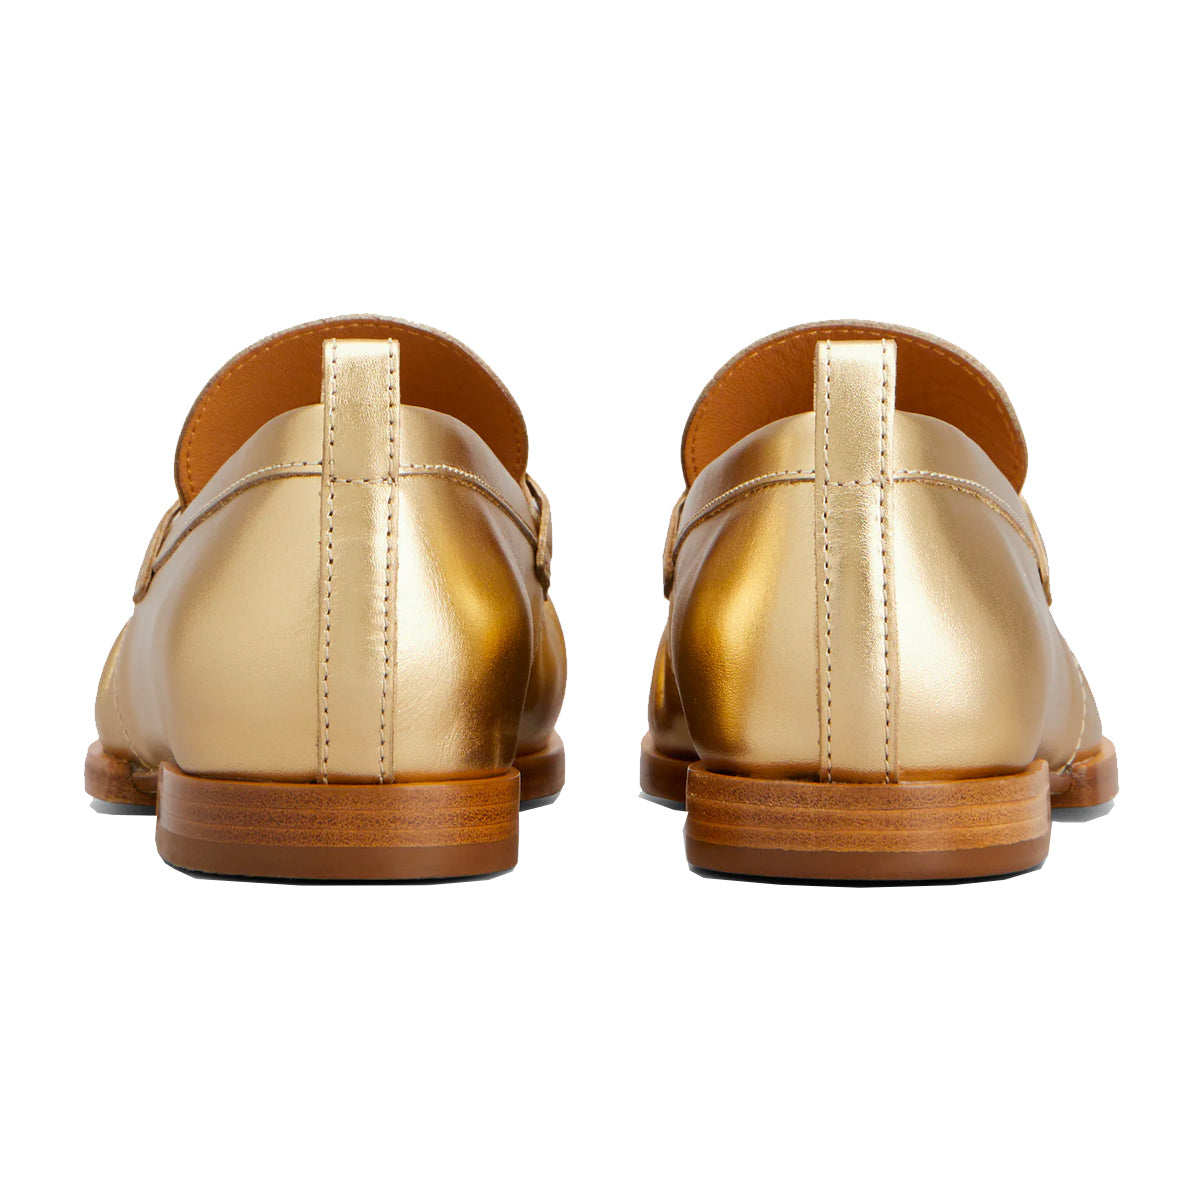 Metallic Mocassin Loafer with Chain Detail